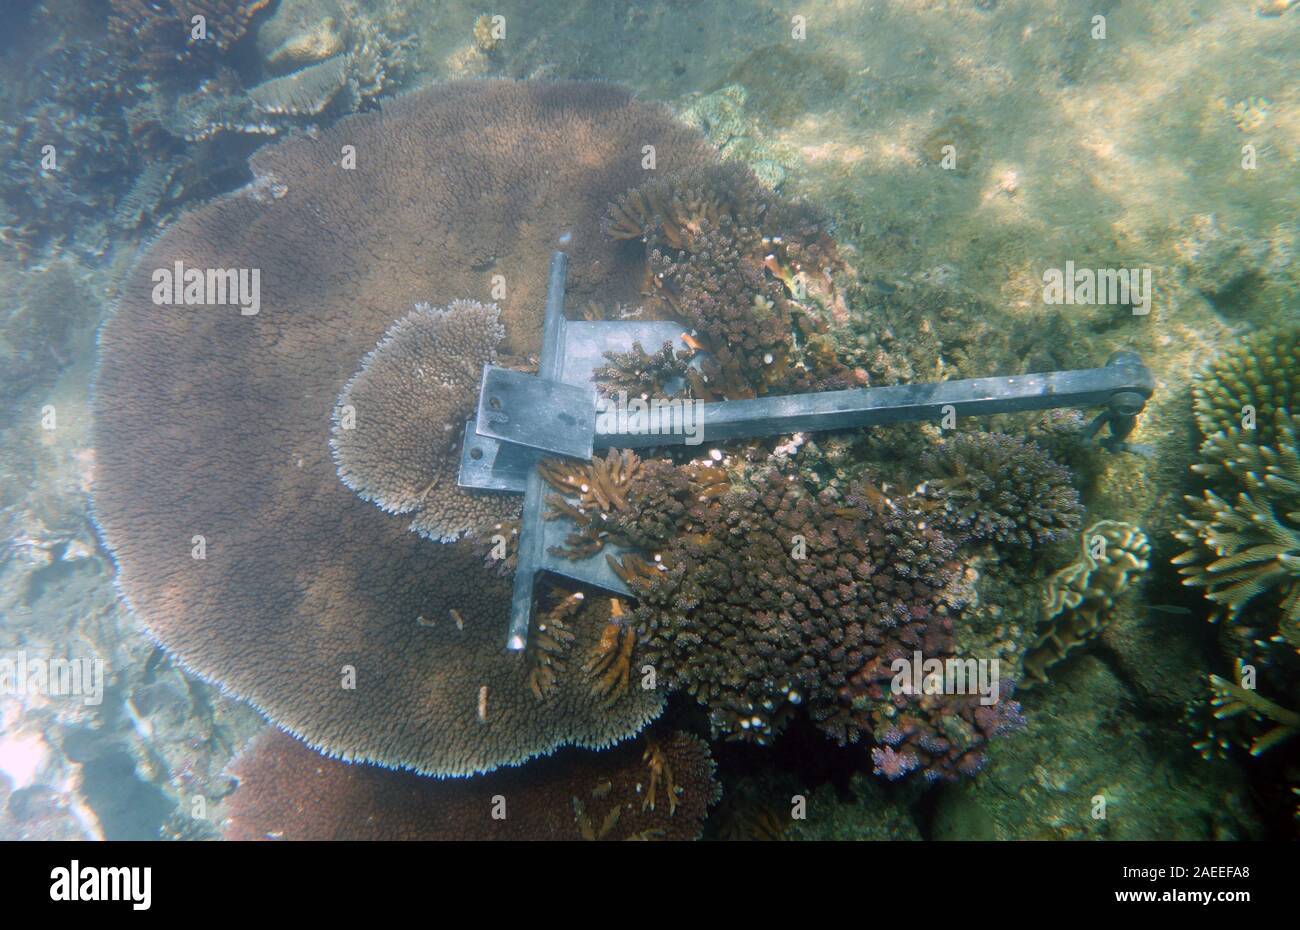 Anchor jammed in reef causing significant coral damage, Russell Island, Frankland Islands National Park, Great Barrier Reef, Queensland, Australia Stock Photo